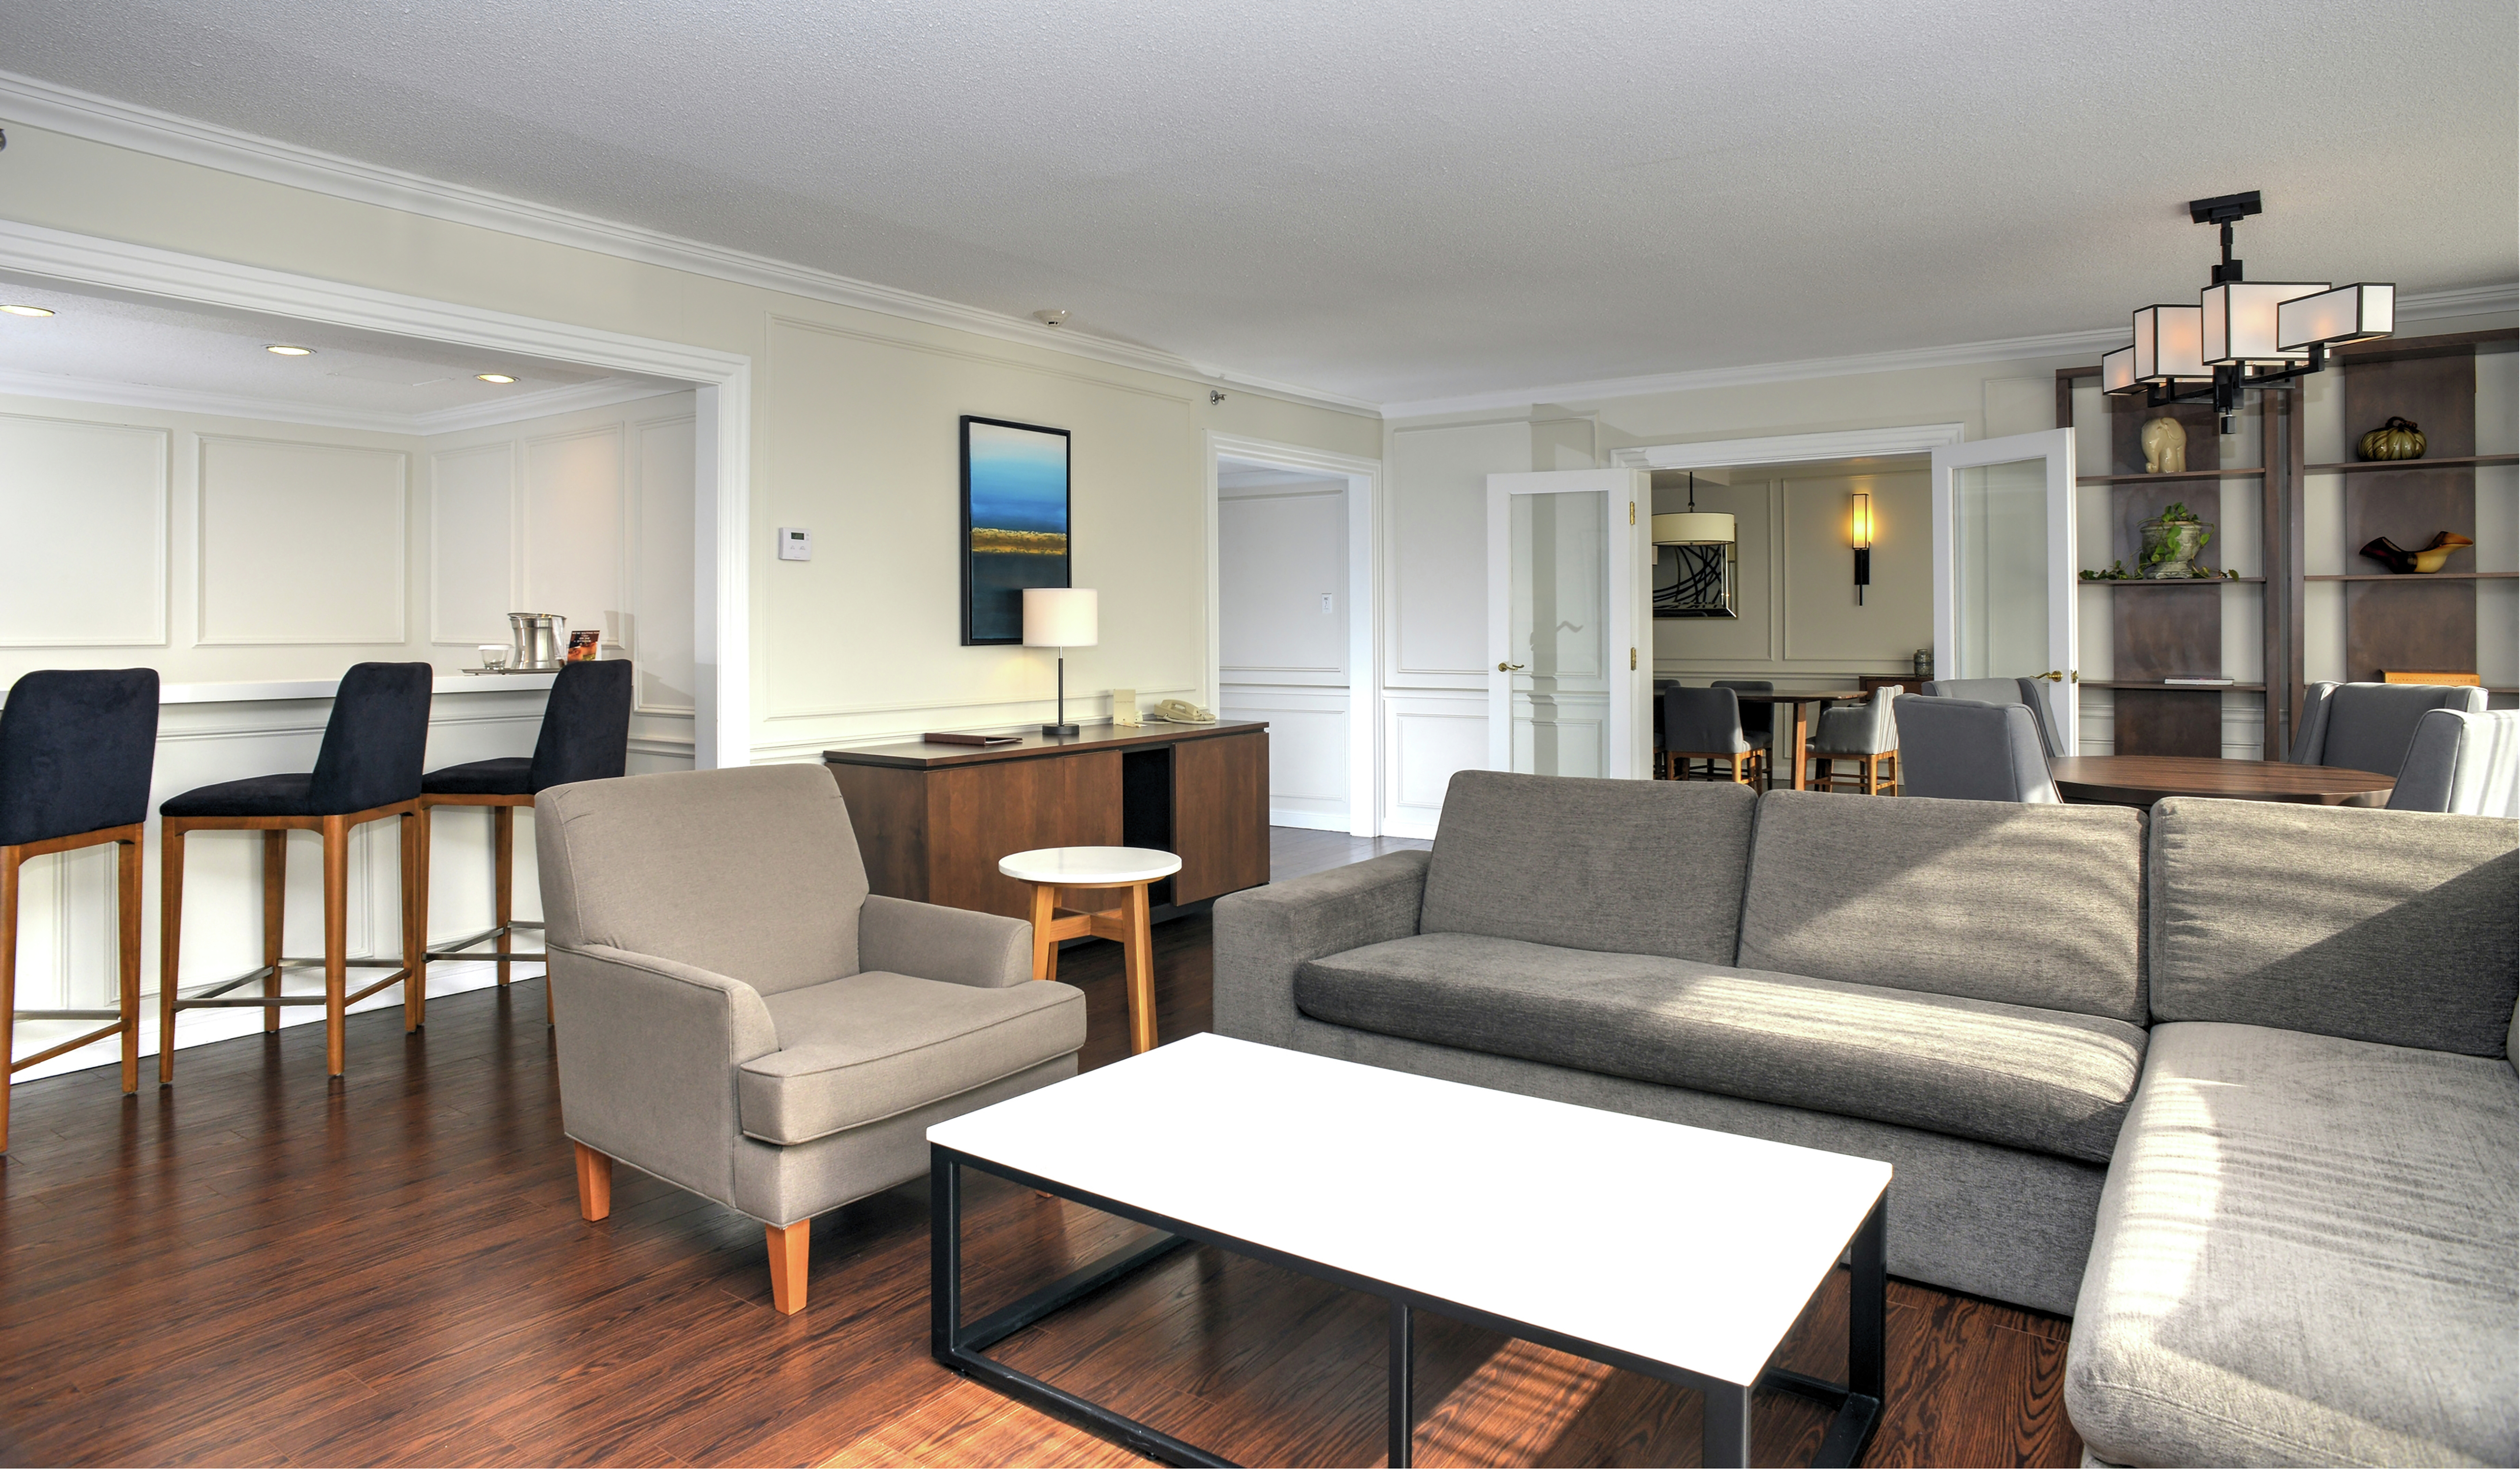 Prime Minister Suite Living Area with Grey Sofa, Chair and Coffee Table